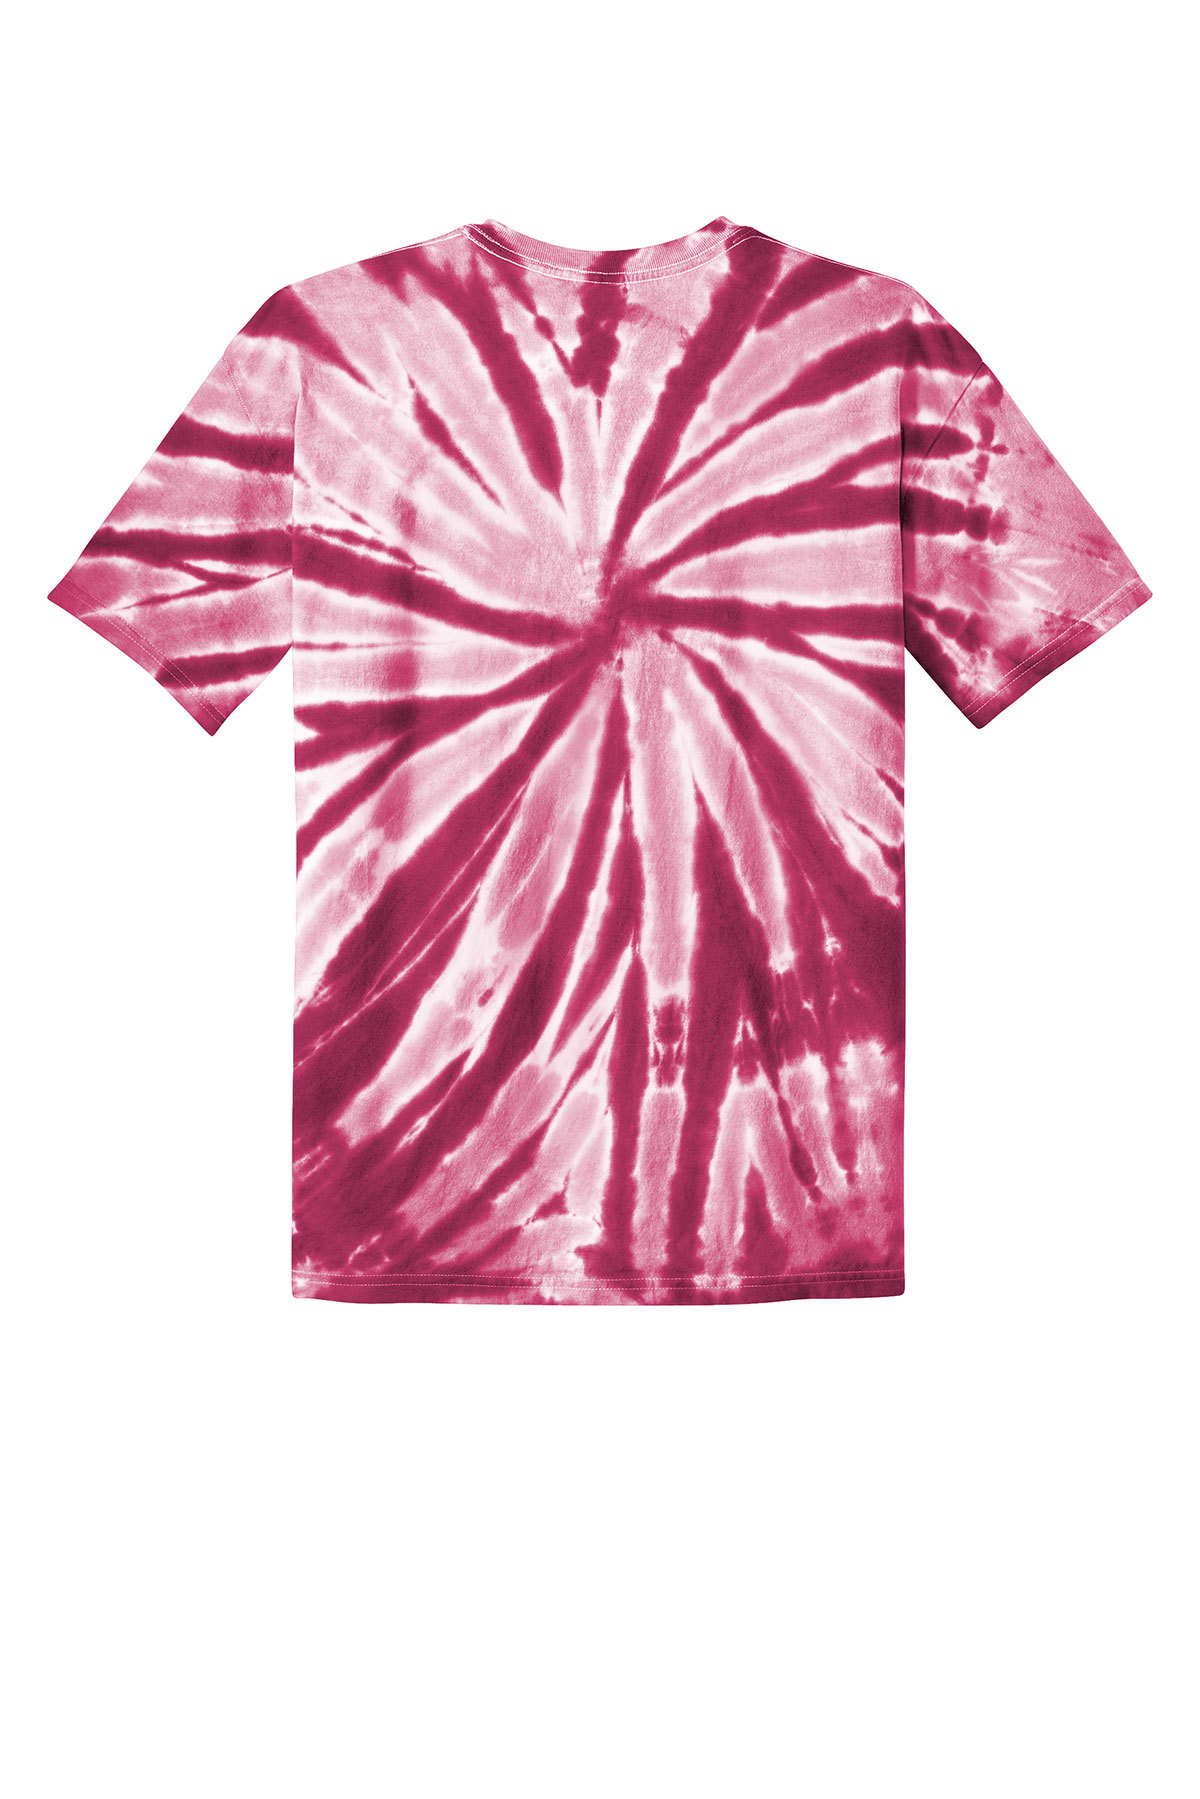 Port & Company Youth Tie-Dye Tee | Product | Company Casuals